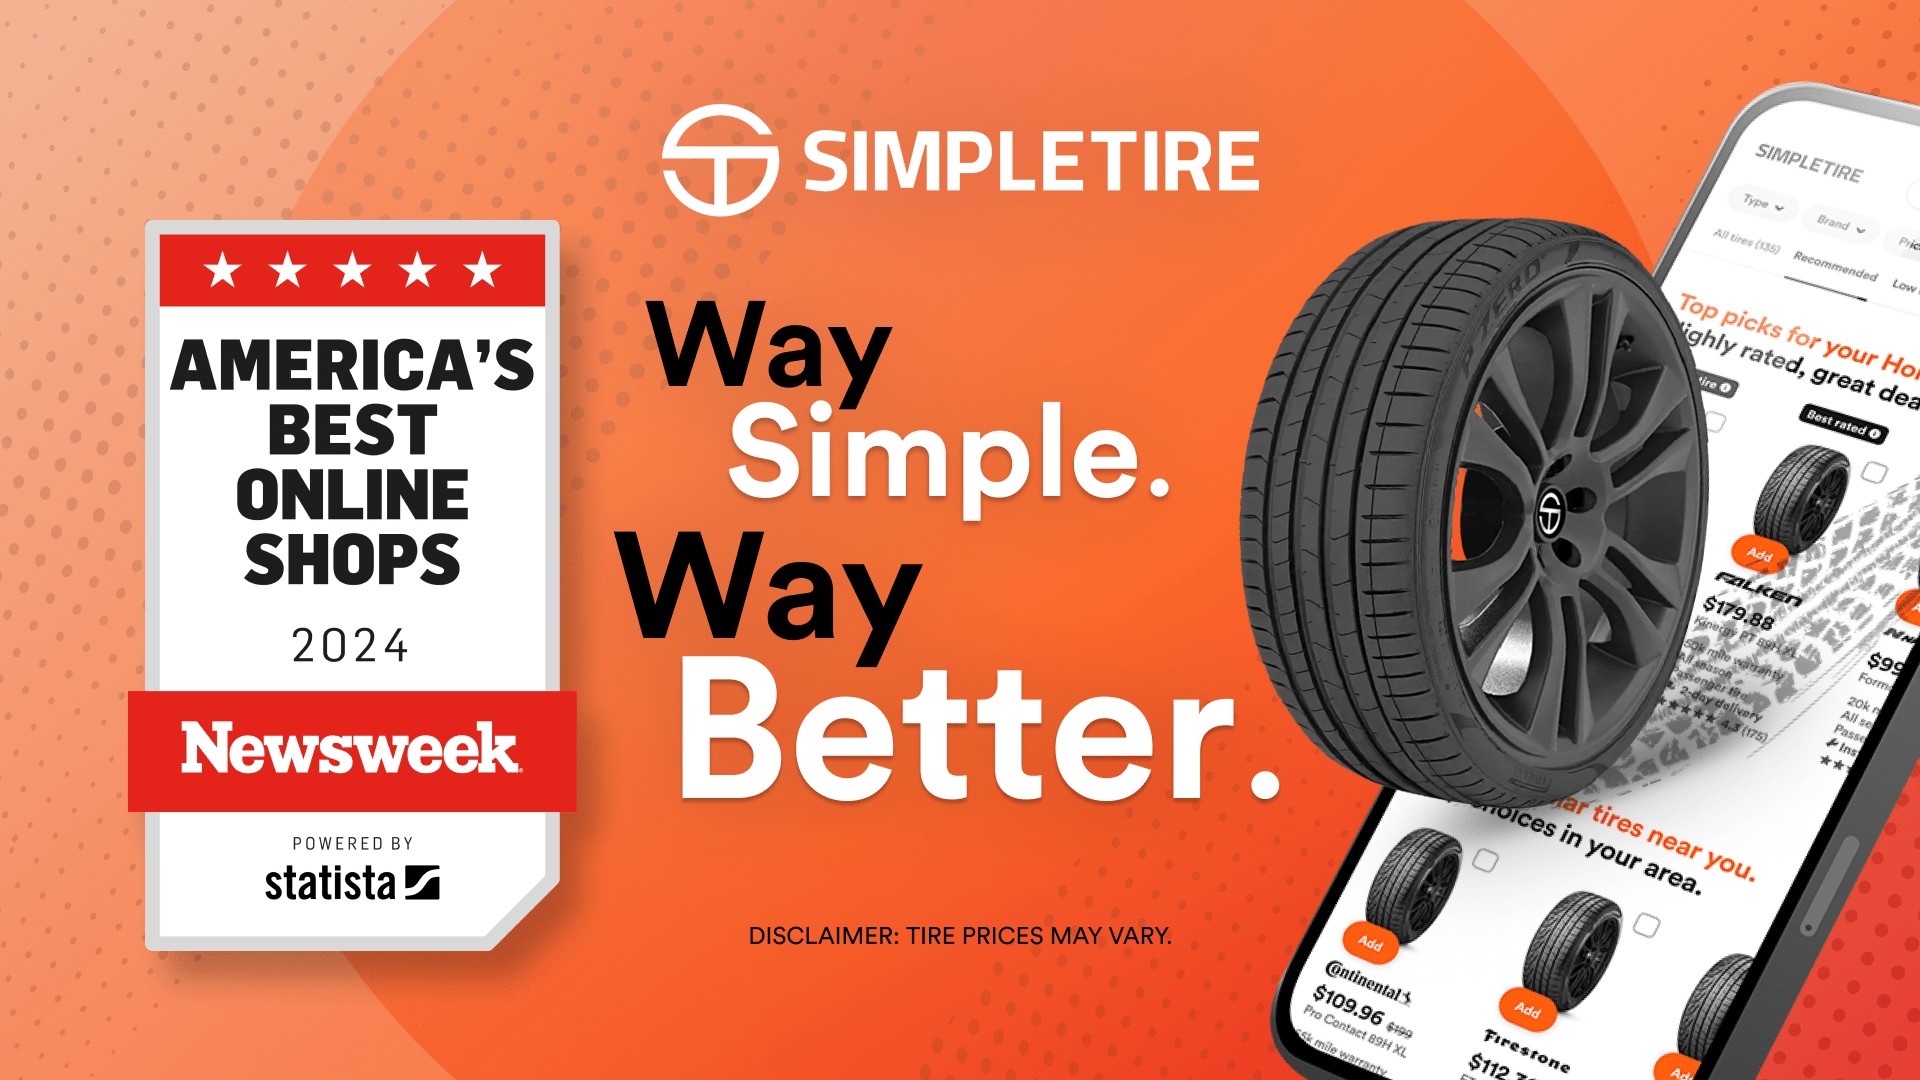 SimpleTire is Top-Ranked Automotive Tire Retailer in Newsweek's 2024 List of America's Best Online Shops